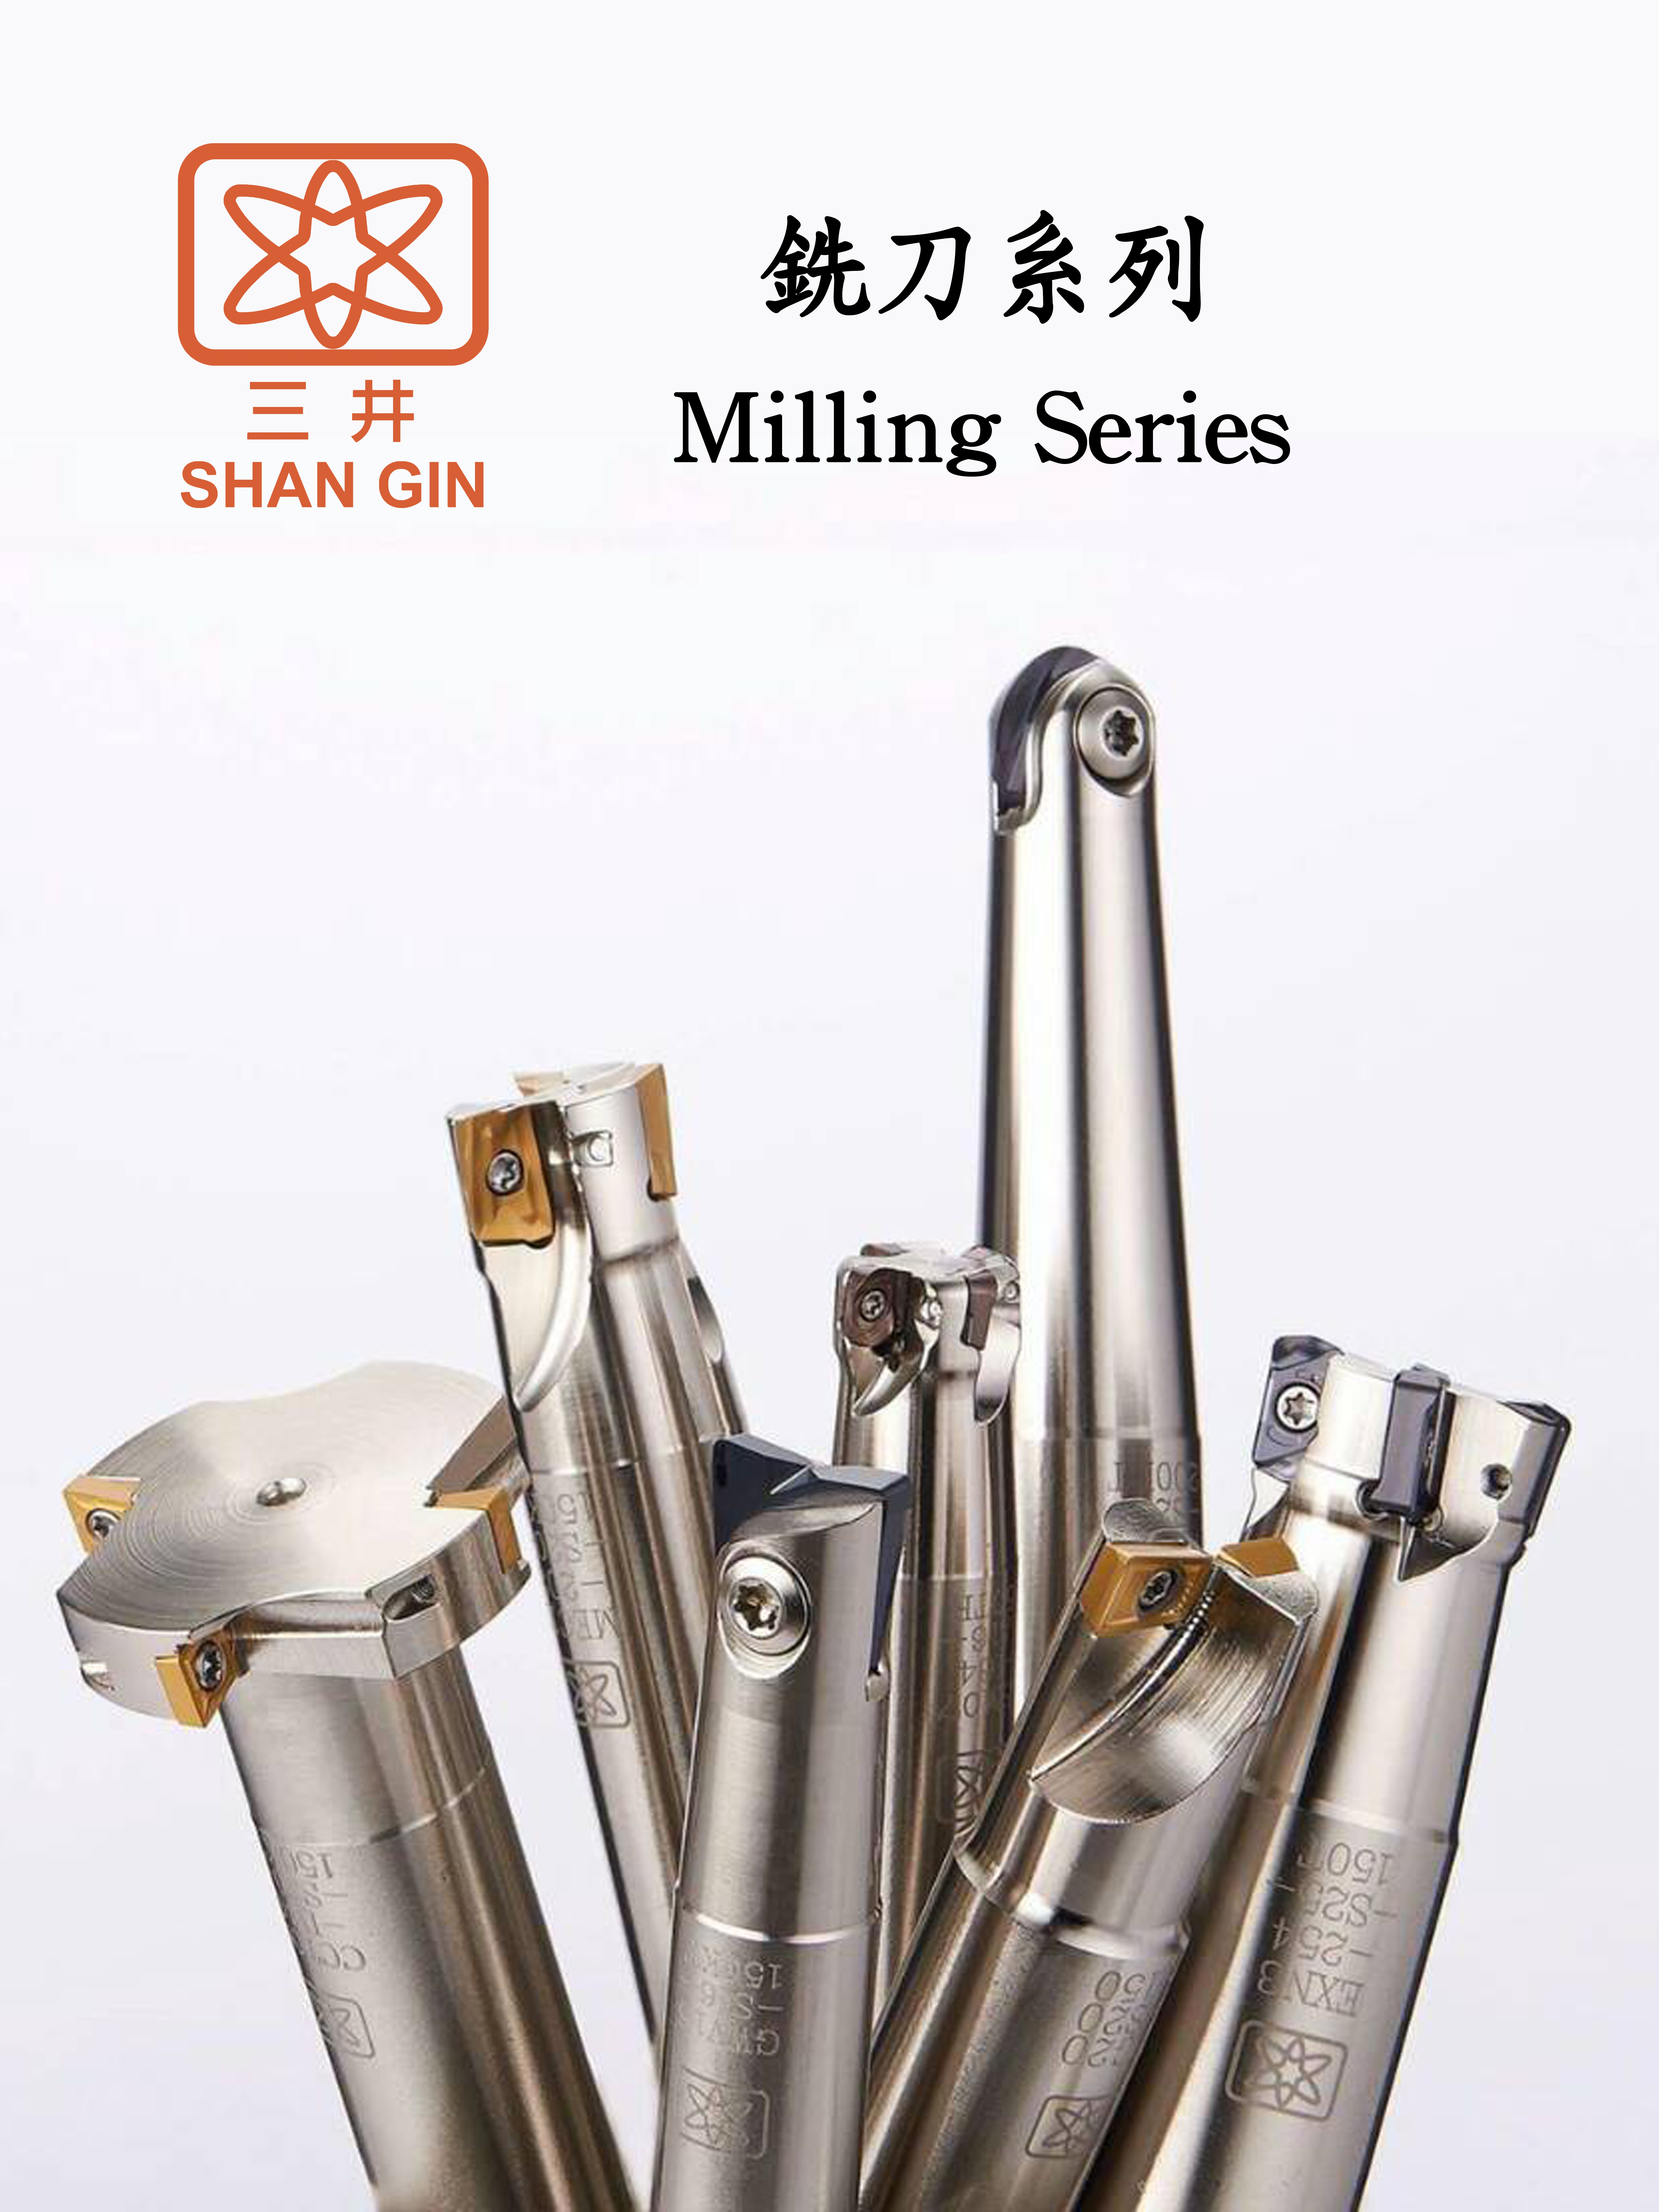 Products|Milling Series